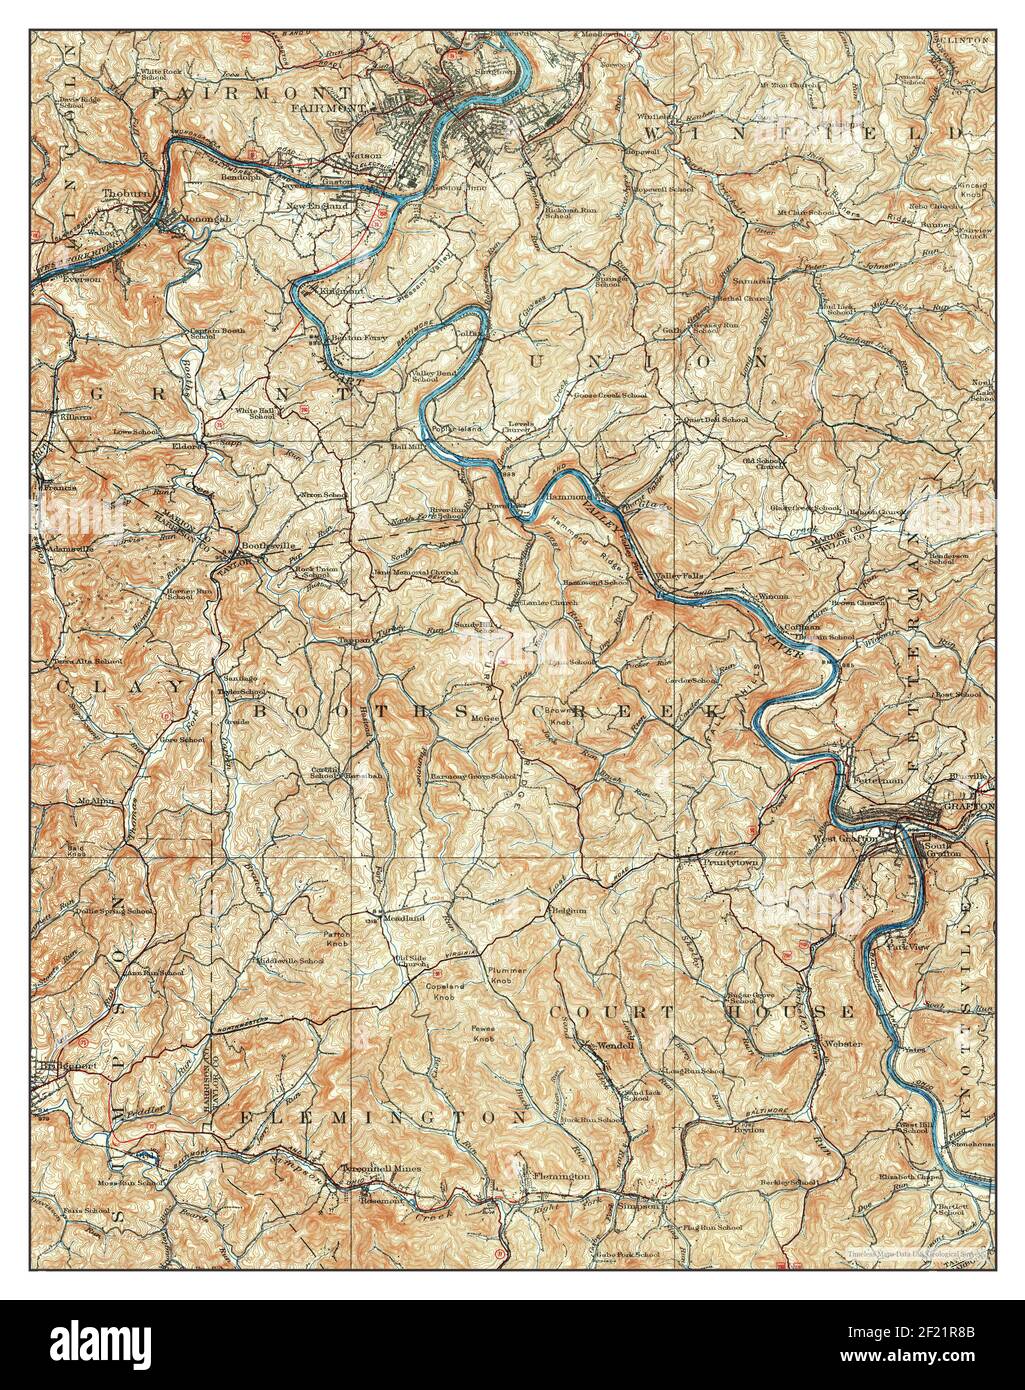 Fairmont, West Virginia, map 1923, 1:62500, United States of America by Timeless Maps, data U.S. Geological Survey Stock Photo